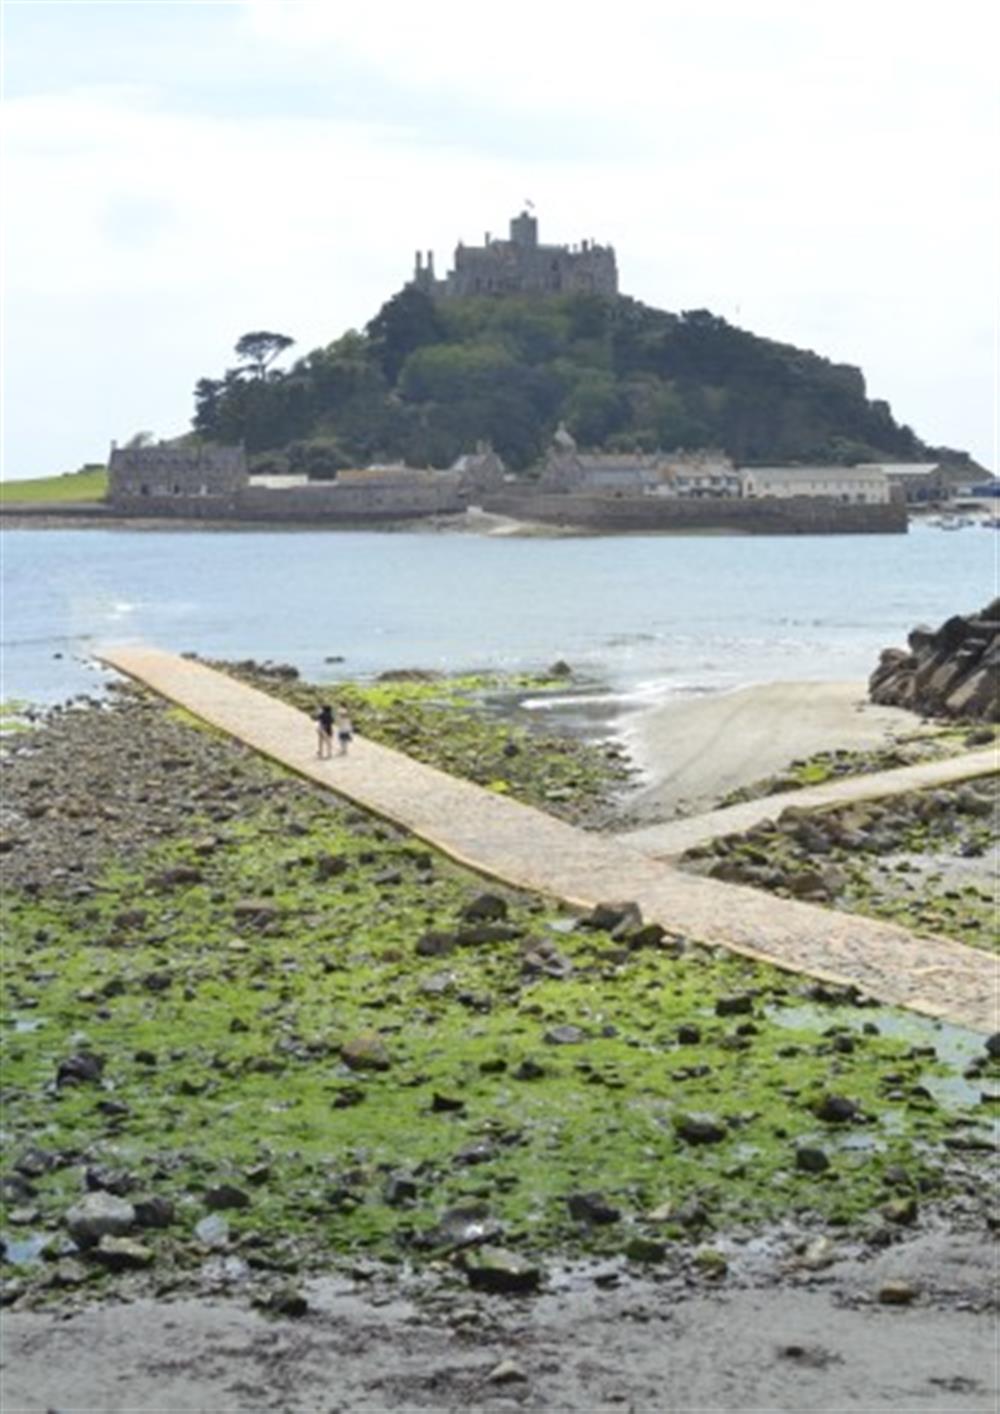 St Michael's Mount is just a 45 minute drive. Cross the causeway by foot or catch the water-taxi across to the island.